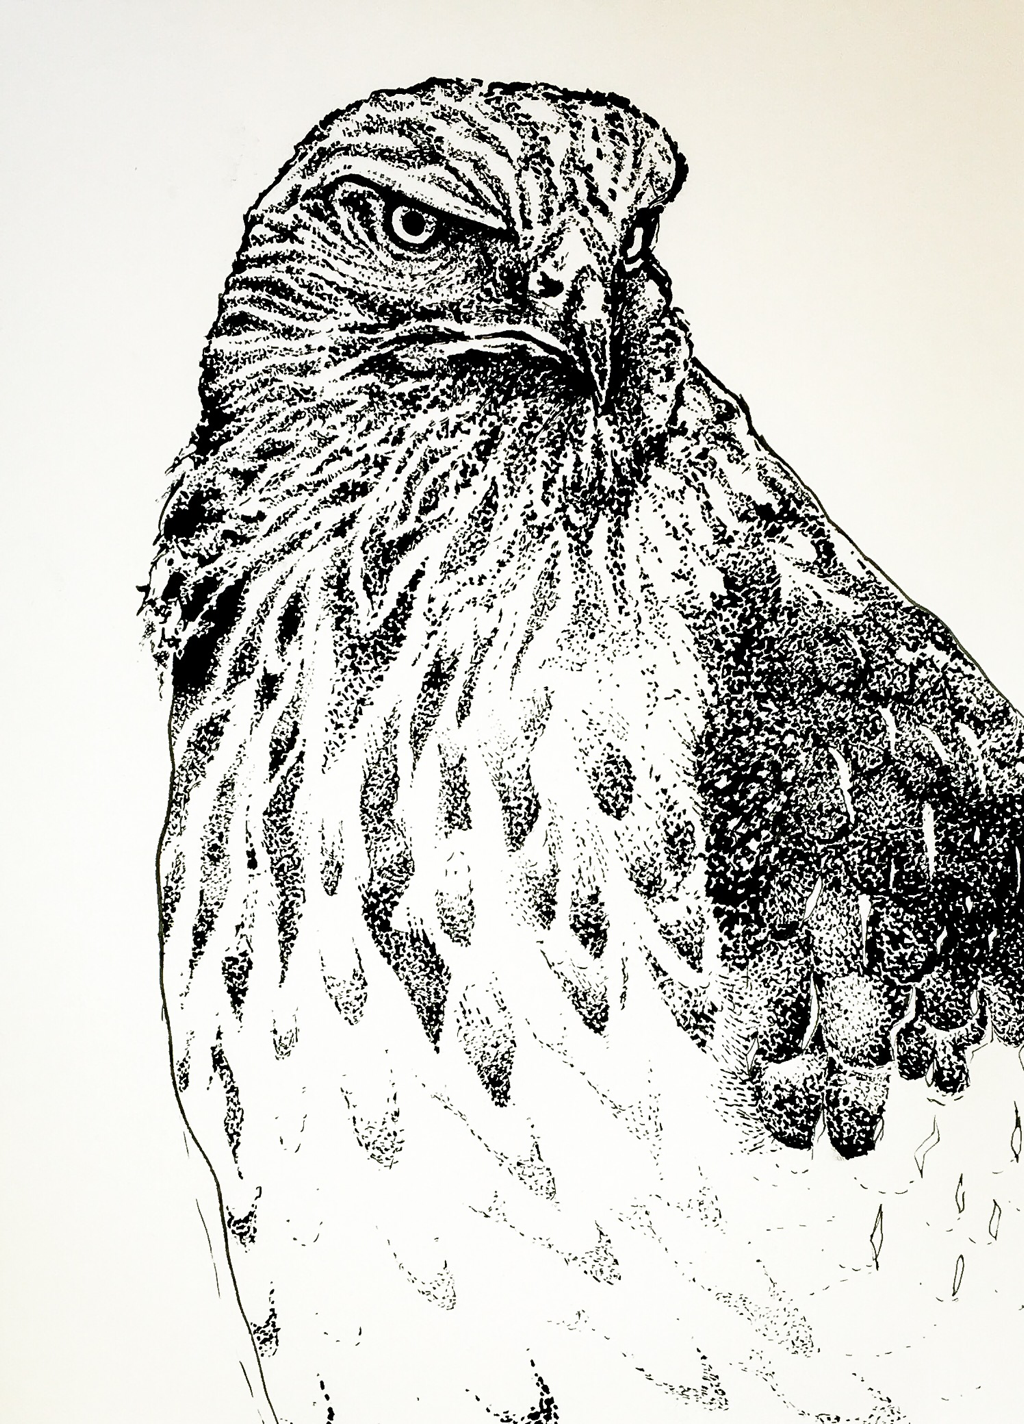 A pen and ink, dot-work drawing of a hawk.